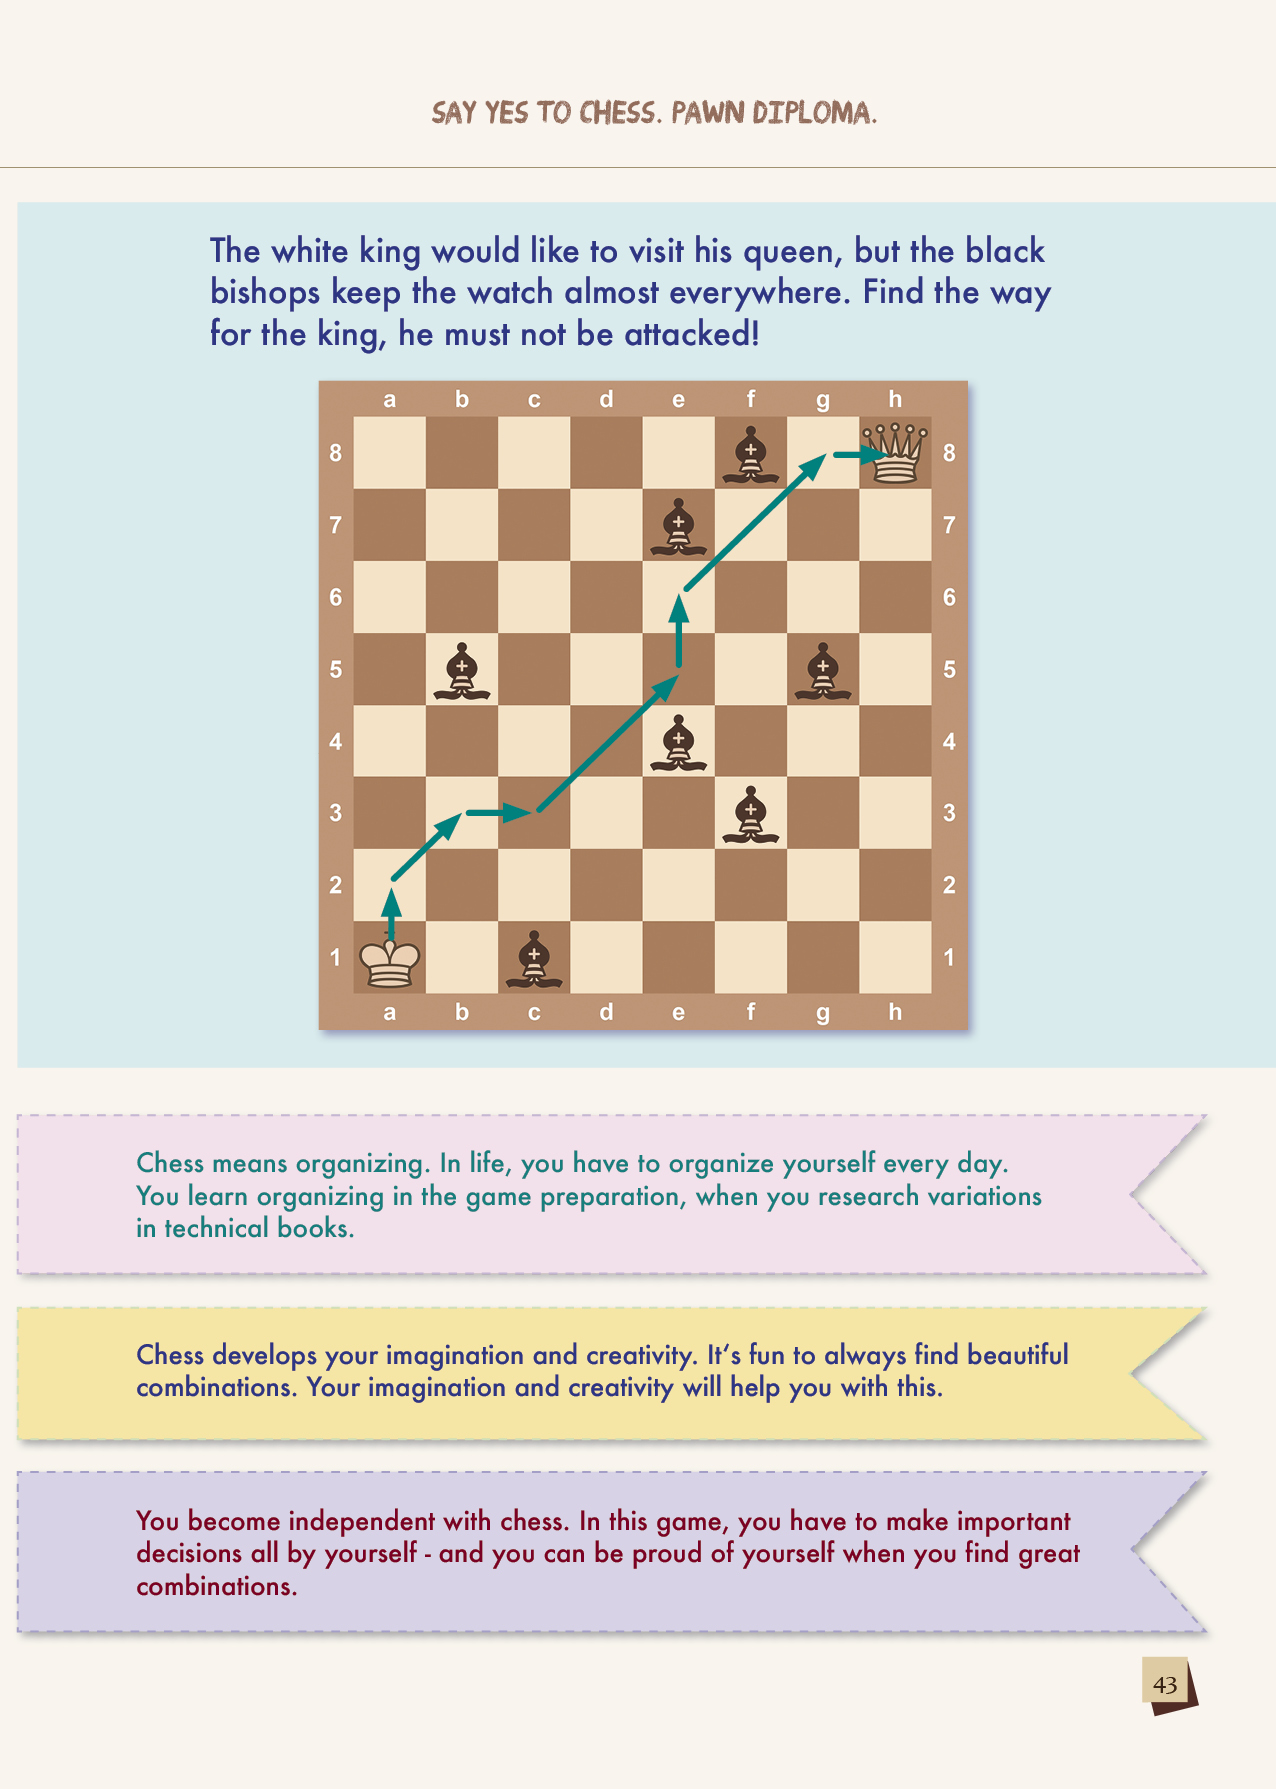 sayyes2chess_solutions_page_43.jpg